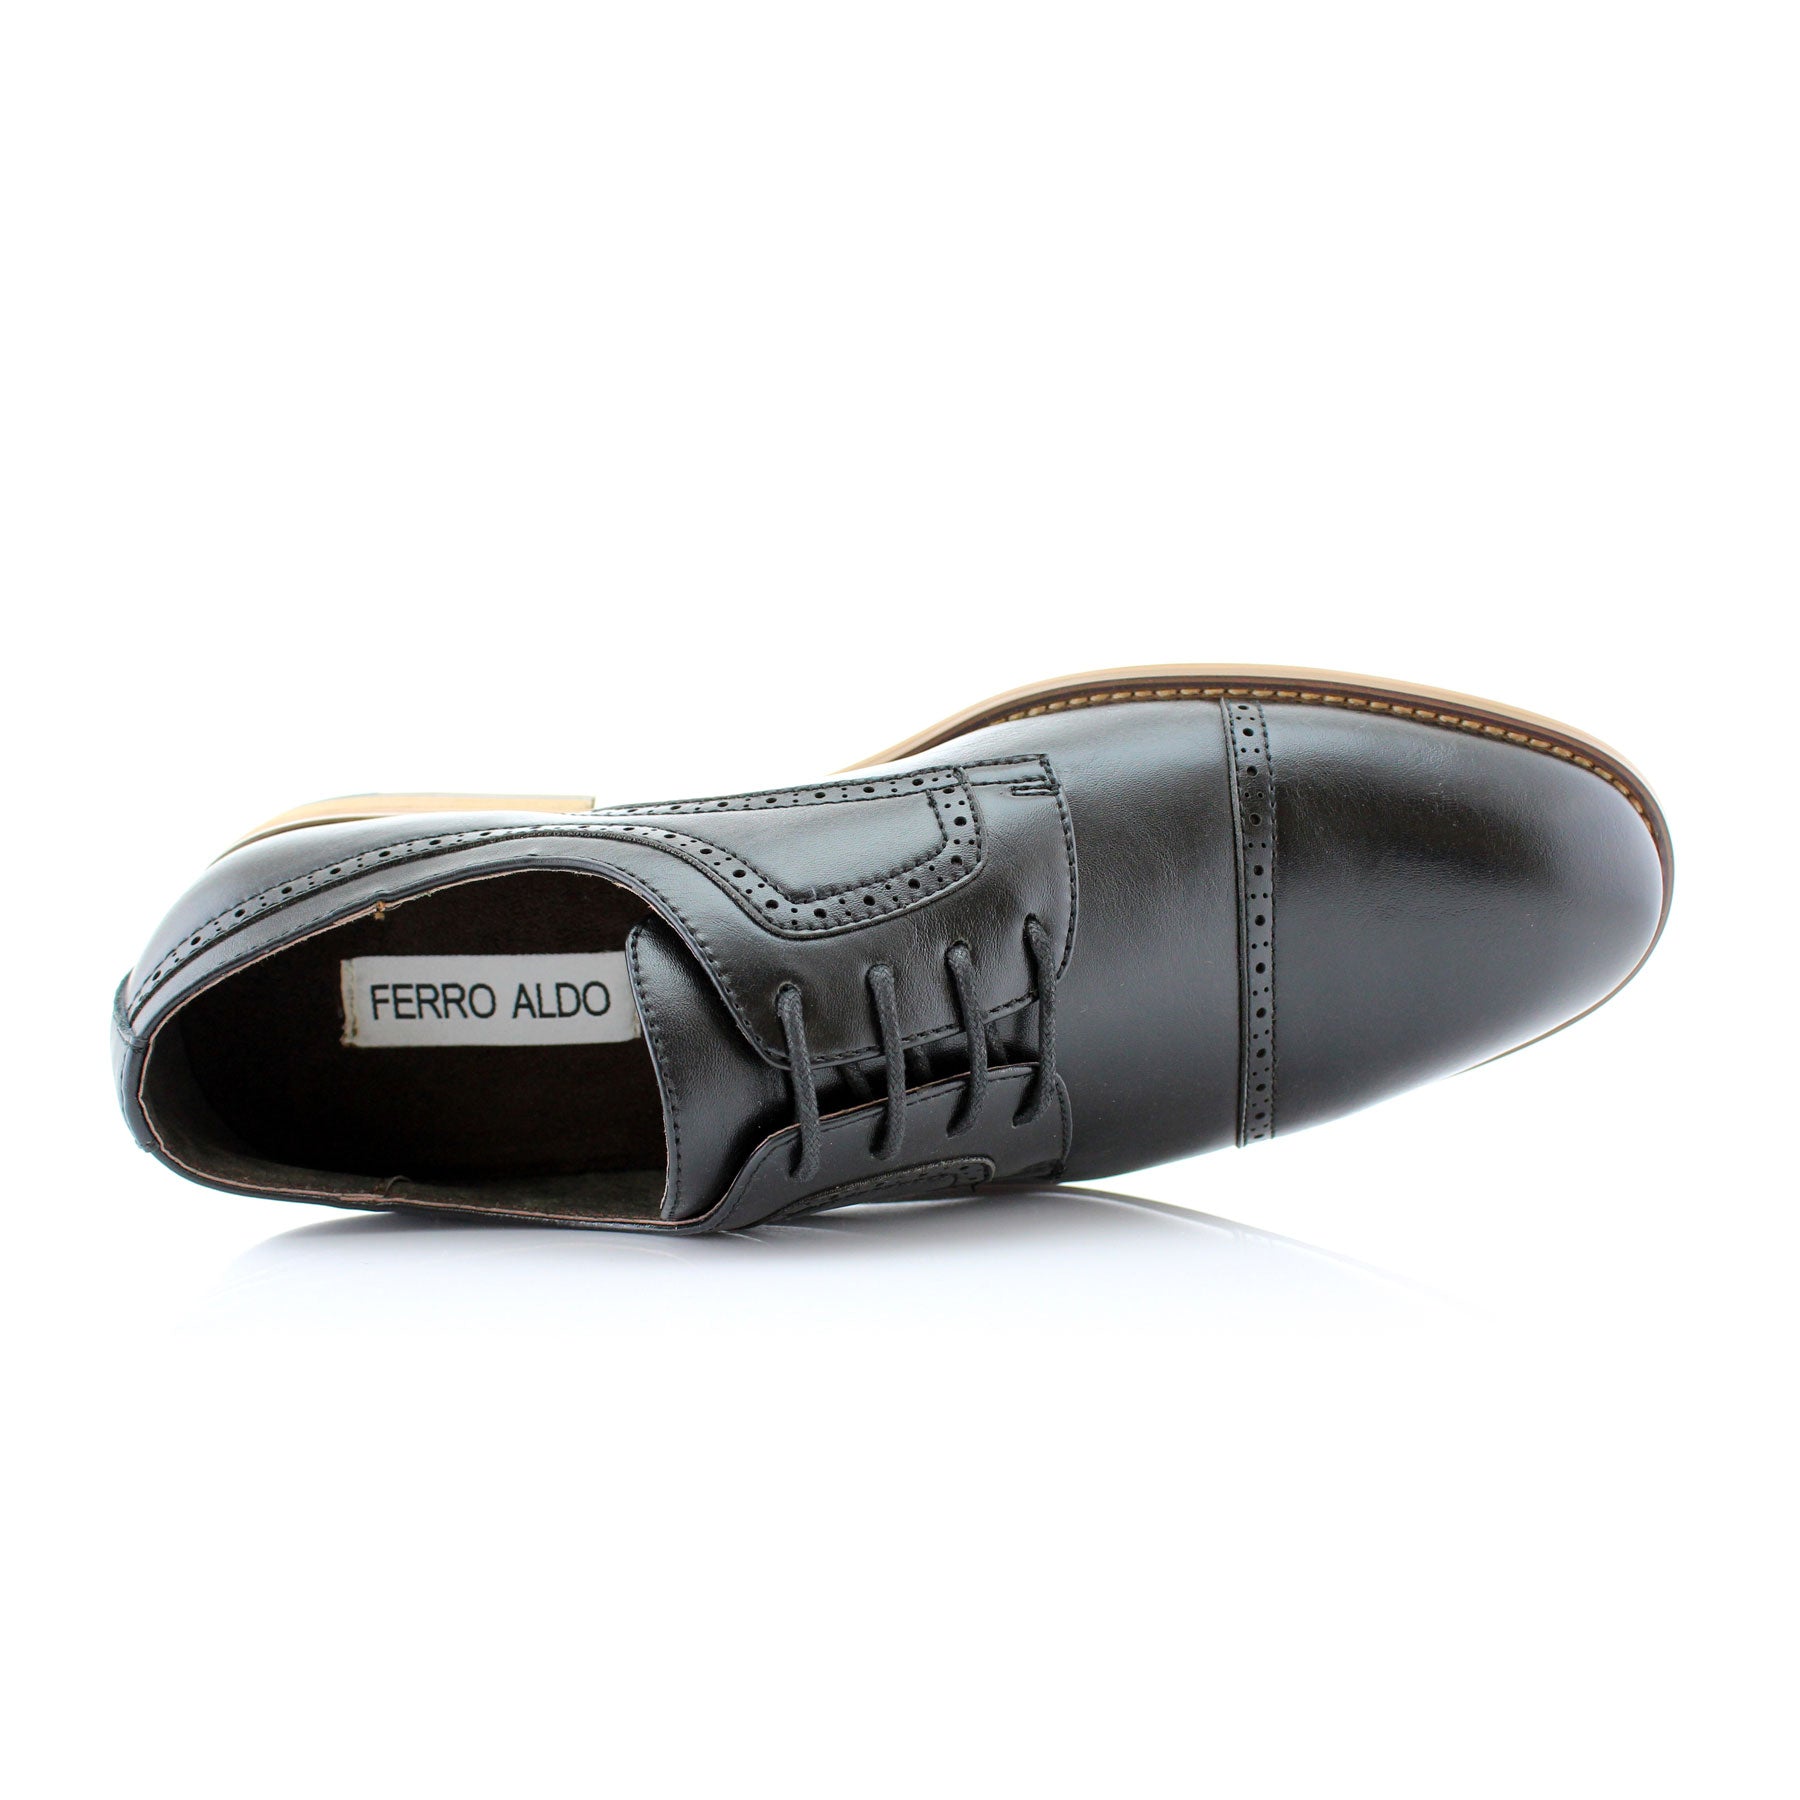 Brogue Burnished Derby Shoes | Jared by Ferro Aldo | Conal Footwear | Top-Down Angle View